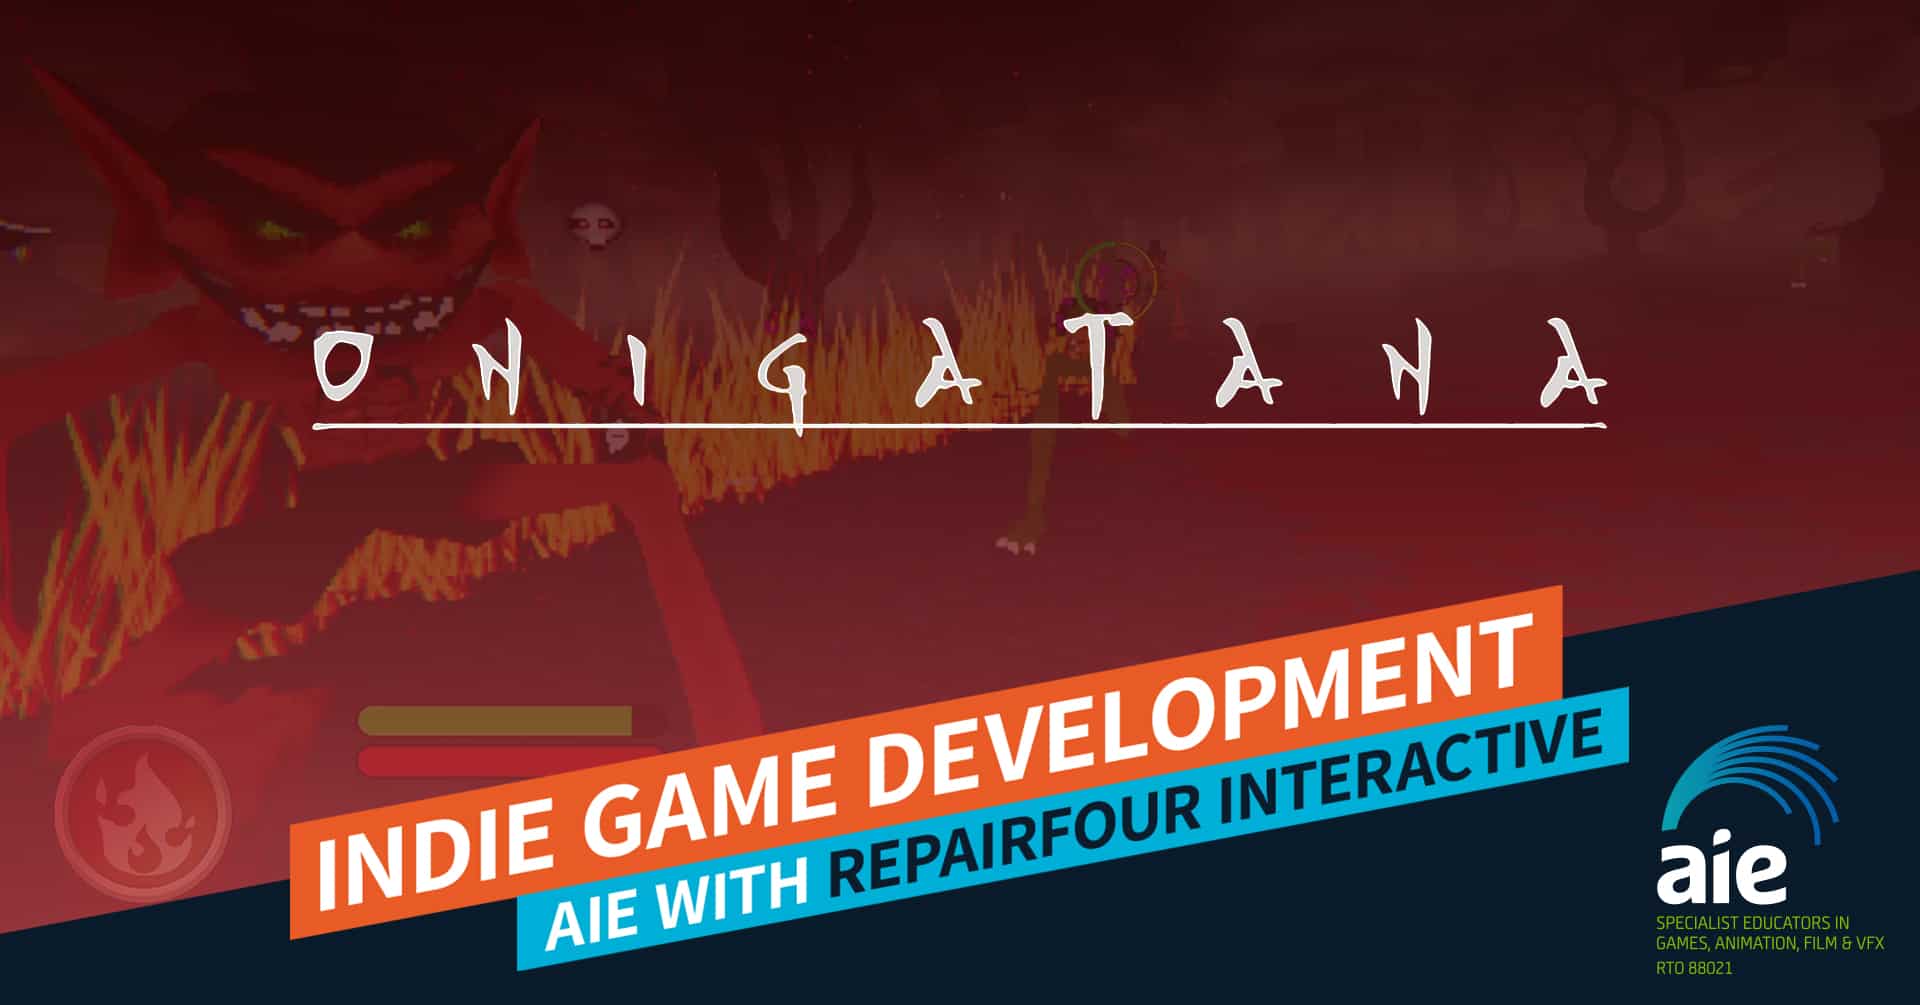 AIE Livestream | Indie Game Development: AIE with RepairFour Interactive